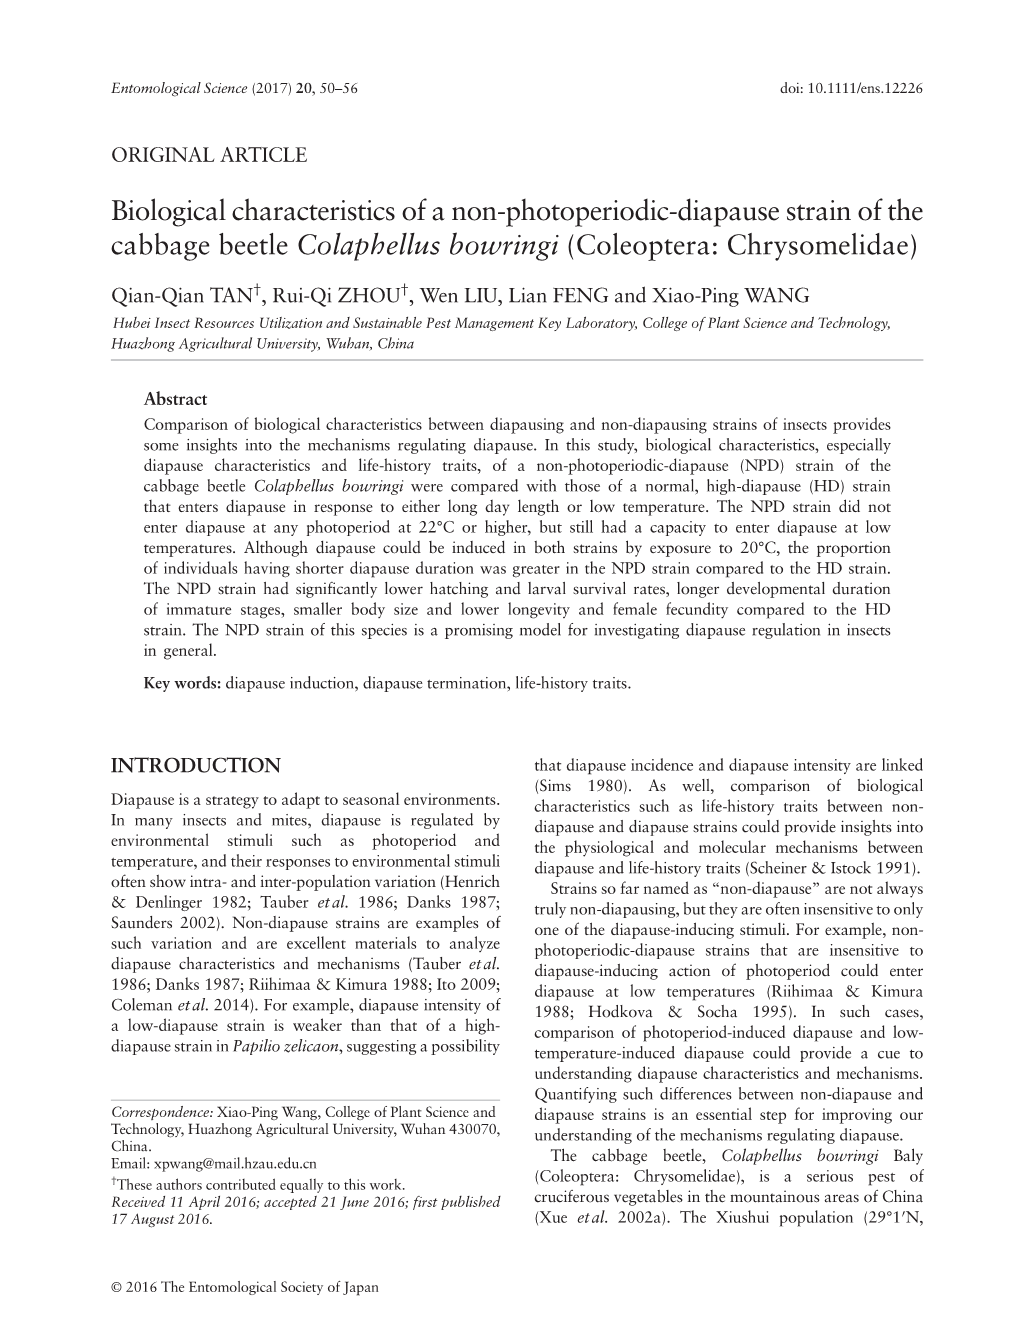 Biological Characteristics of a Non-Photoperiodic-Diapause Strain of the Cabbage Beetle Colaphellus Bowringi (Coleoptera: Chrysomelidae)